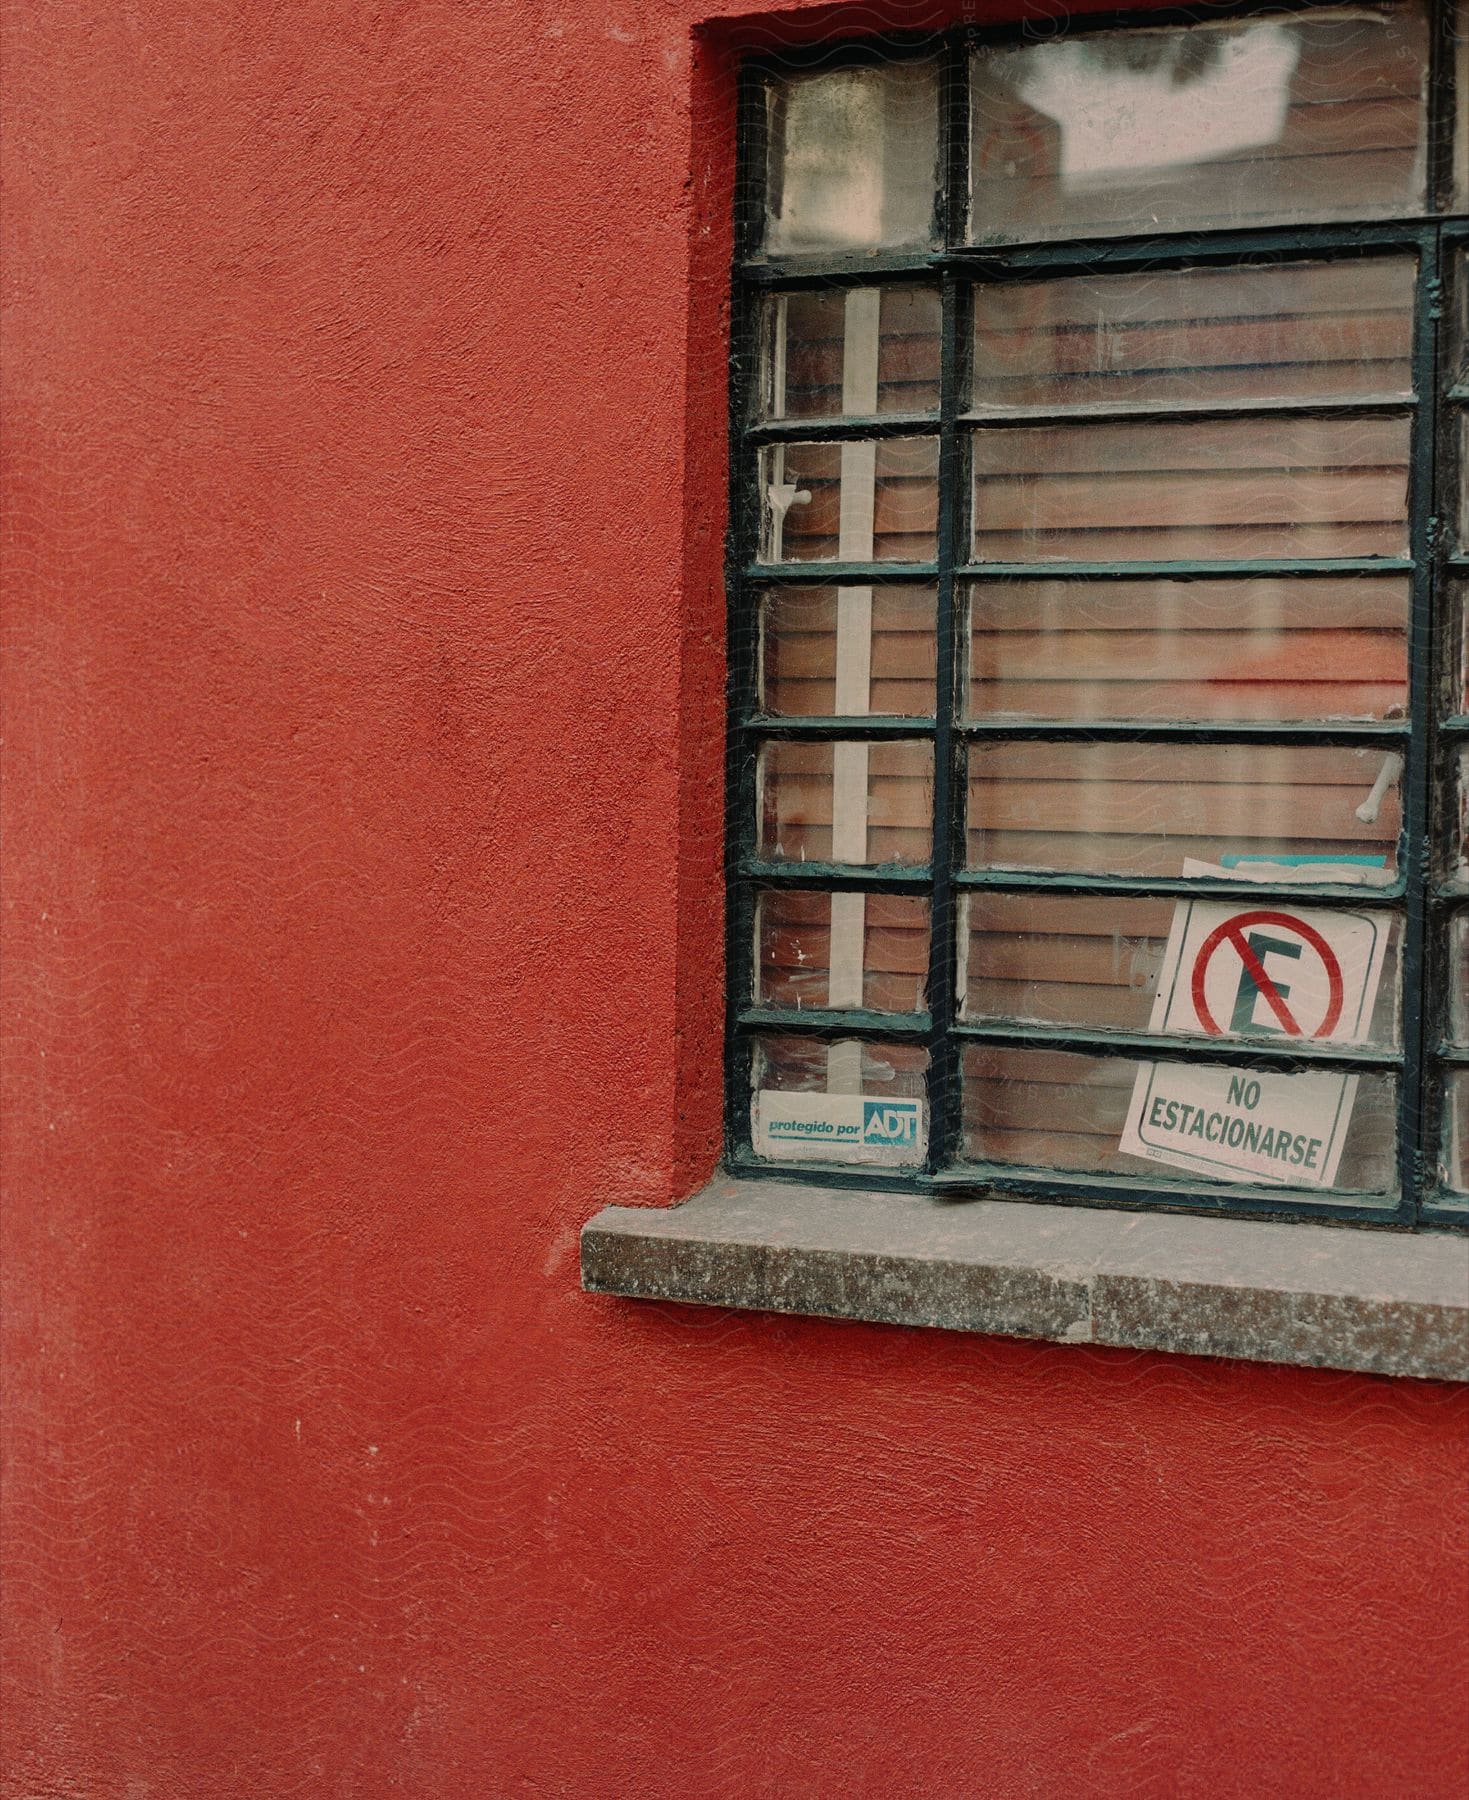 A window and a red wall on the side of a building outdoors.